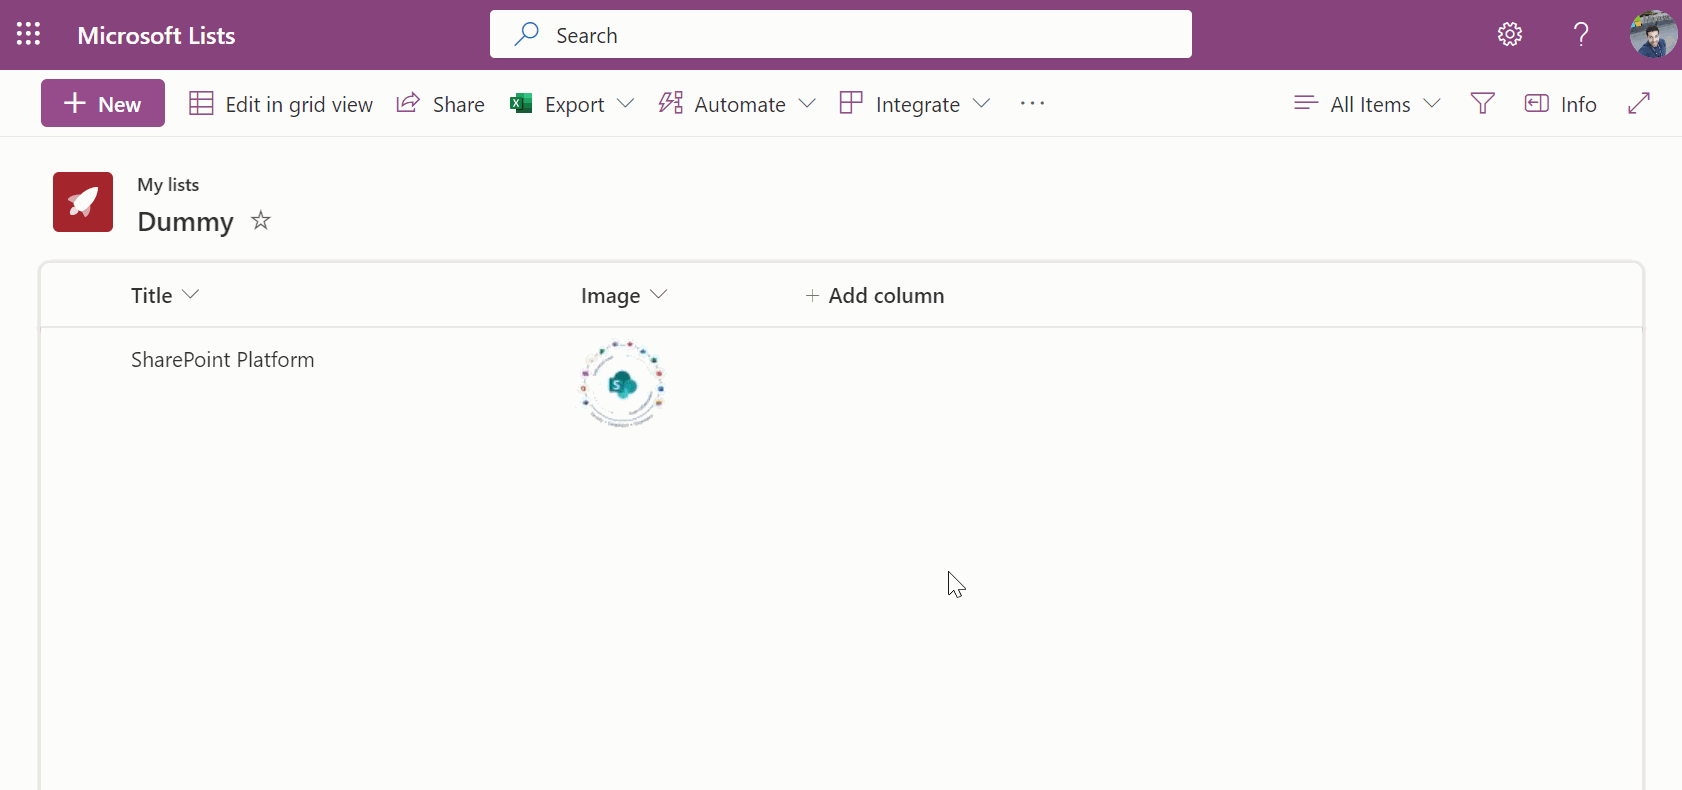 Fix Microsoft Lists image preview